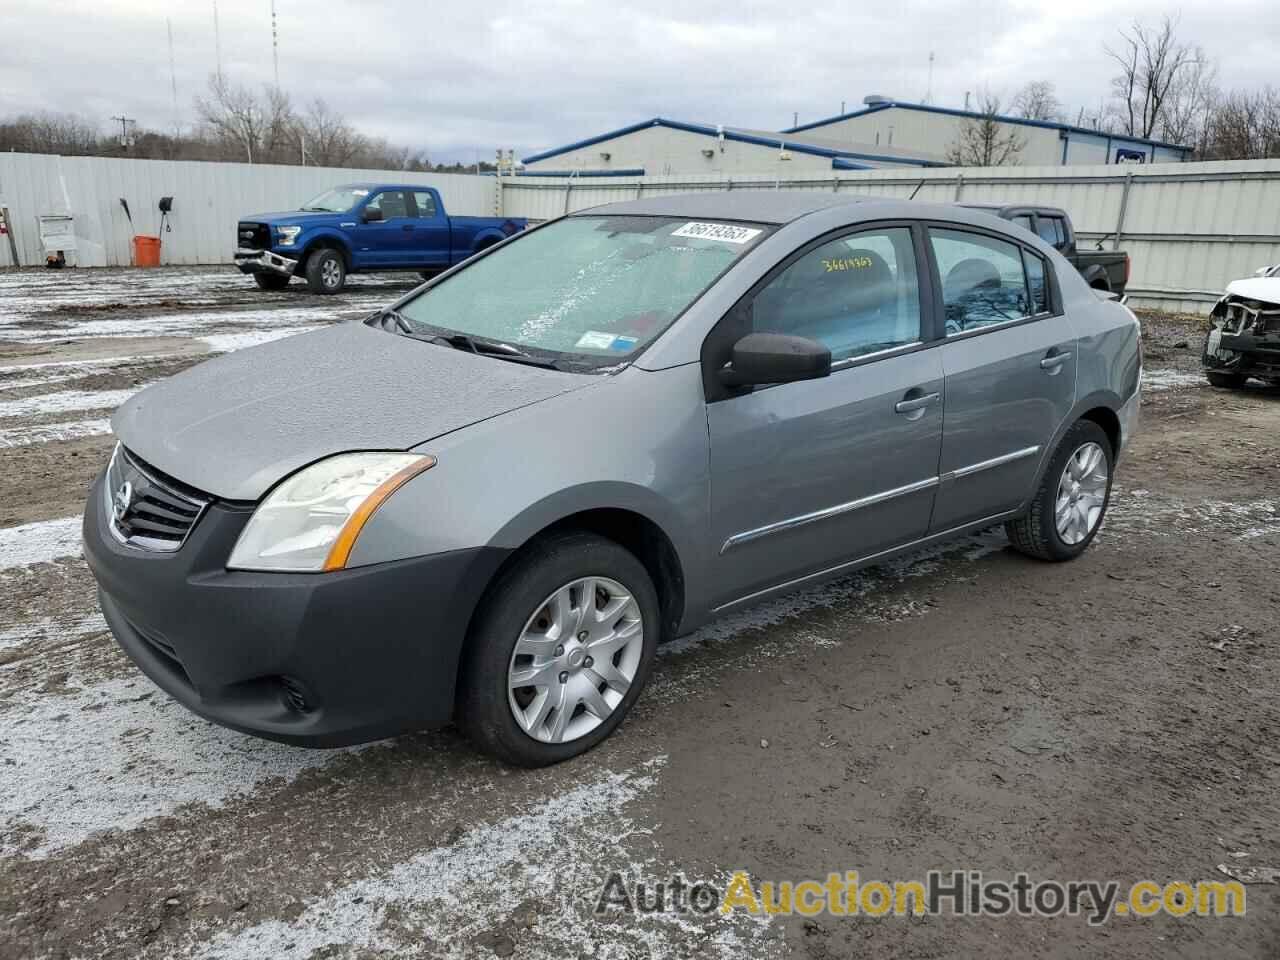 2012 NISSAN SENTRA 2.0, 3N1AB6APXCL676124